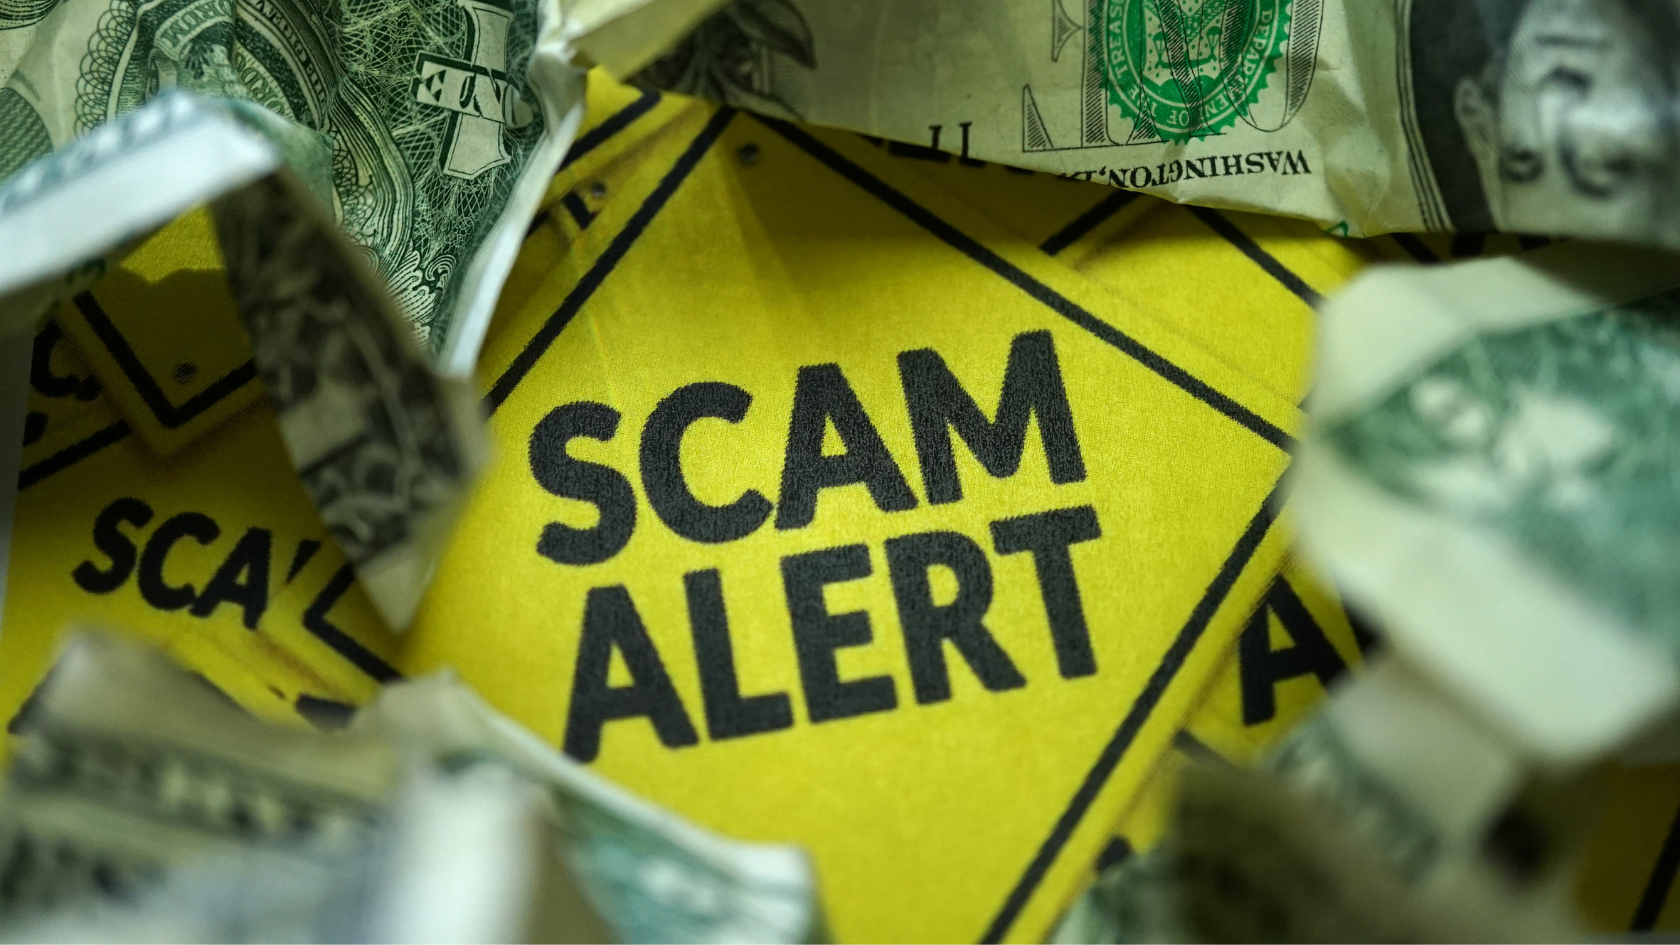 How to spot roofing scams in Alabama